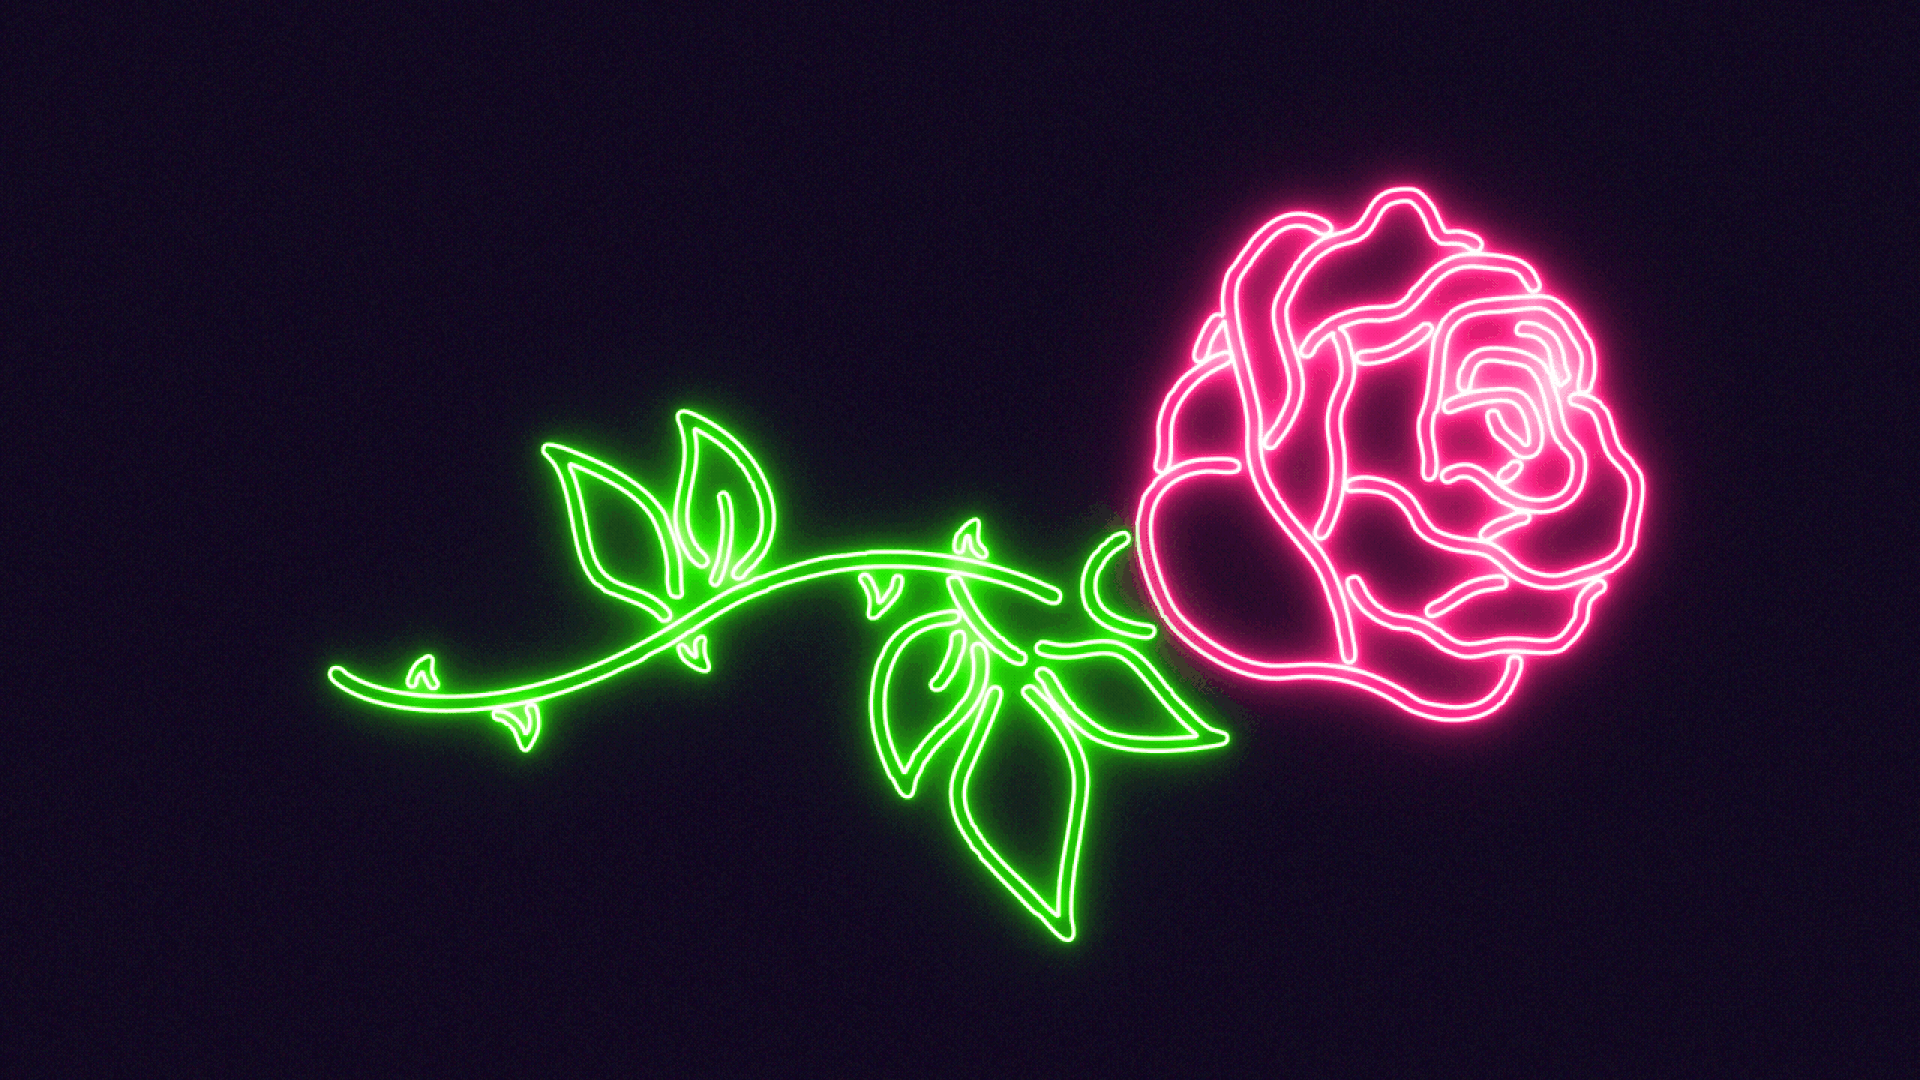 Illustration of a neon sign depicting a rose.